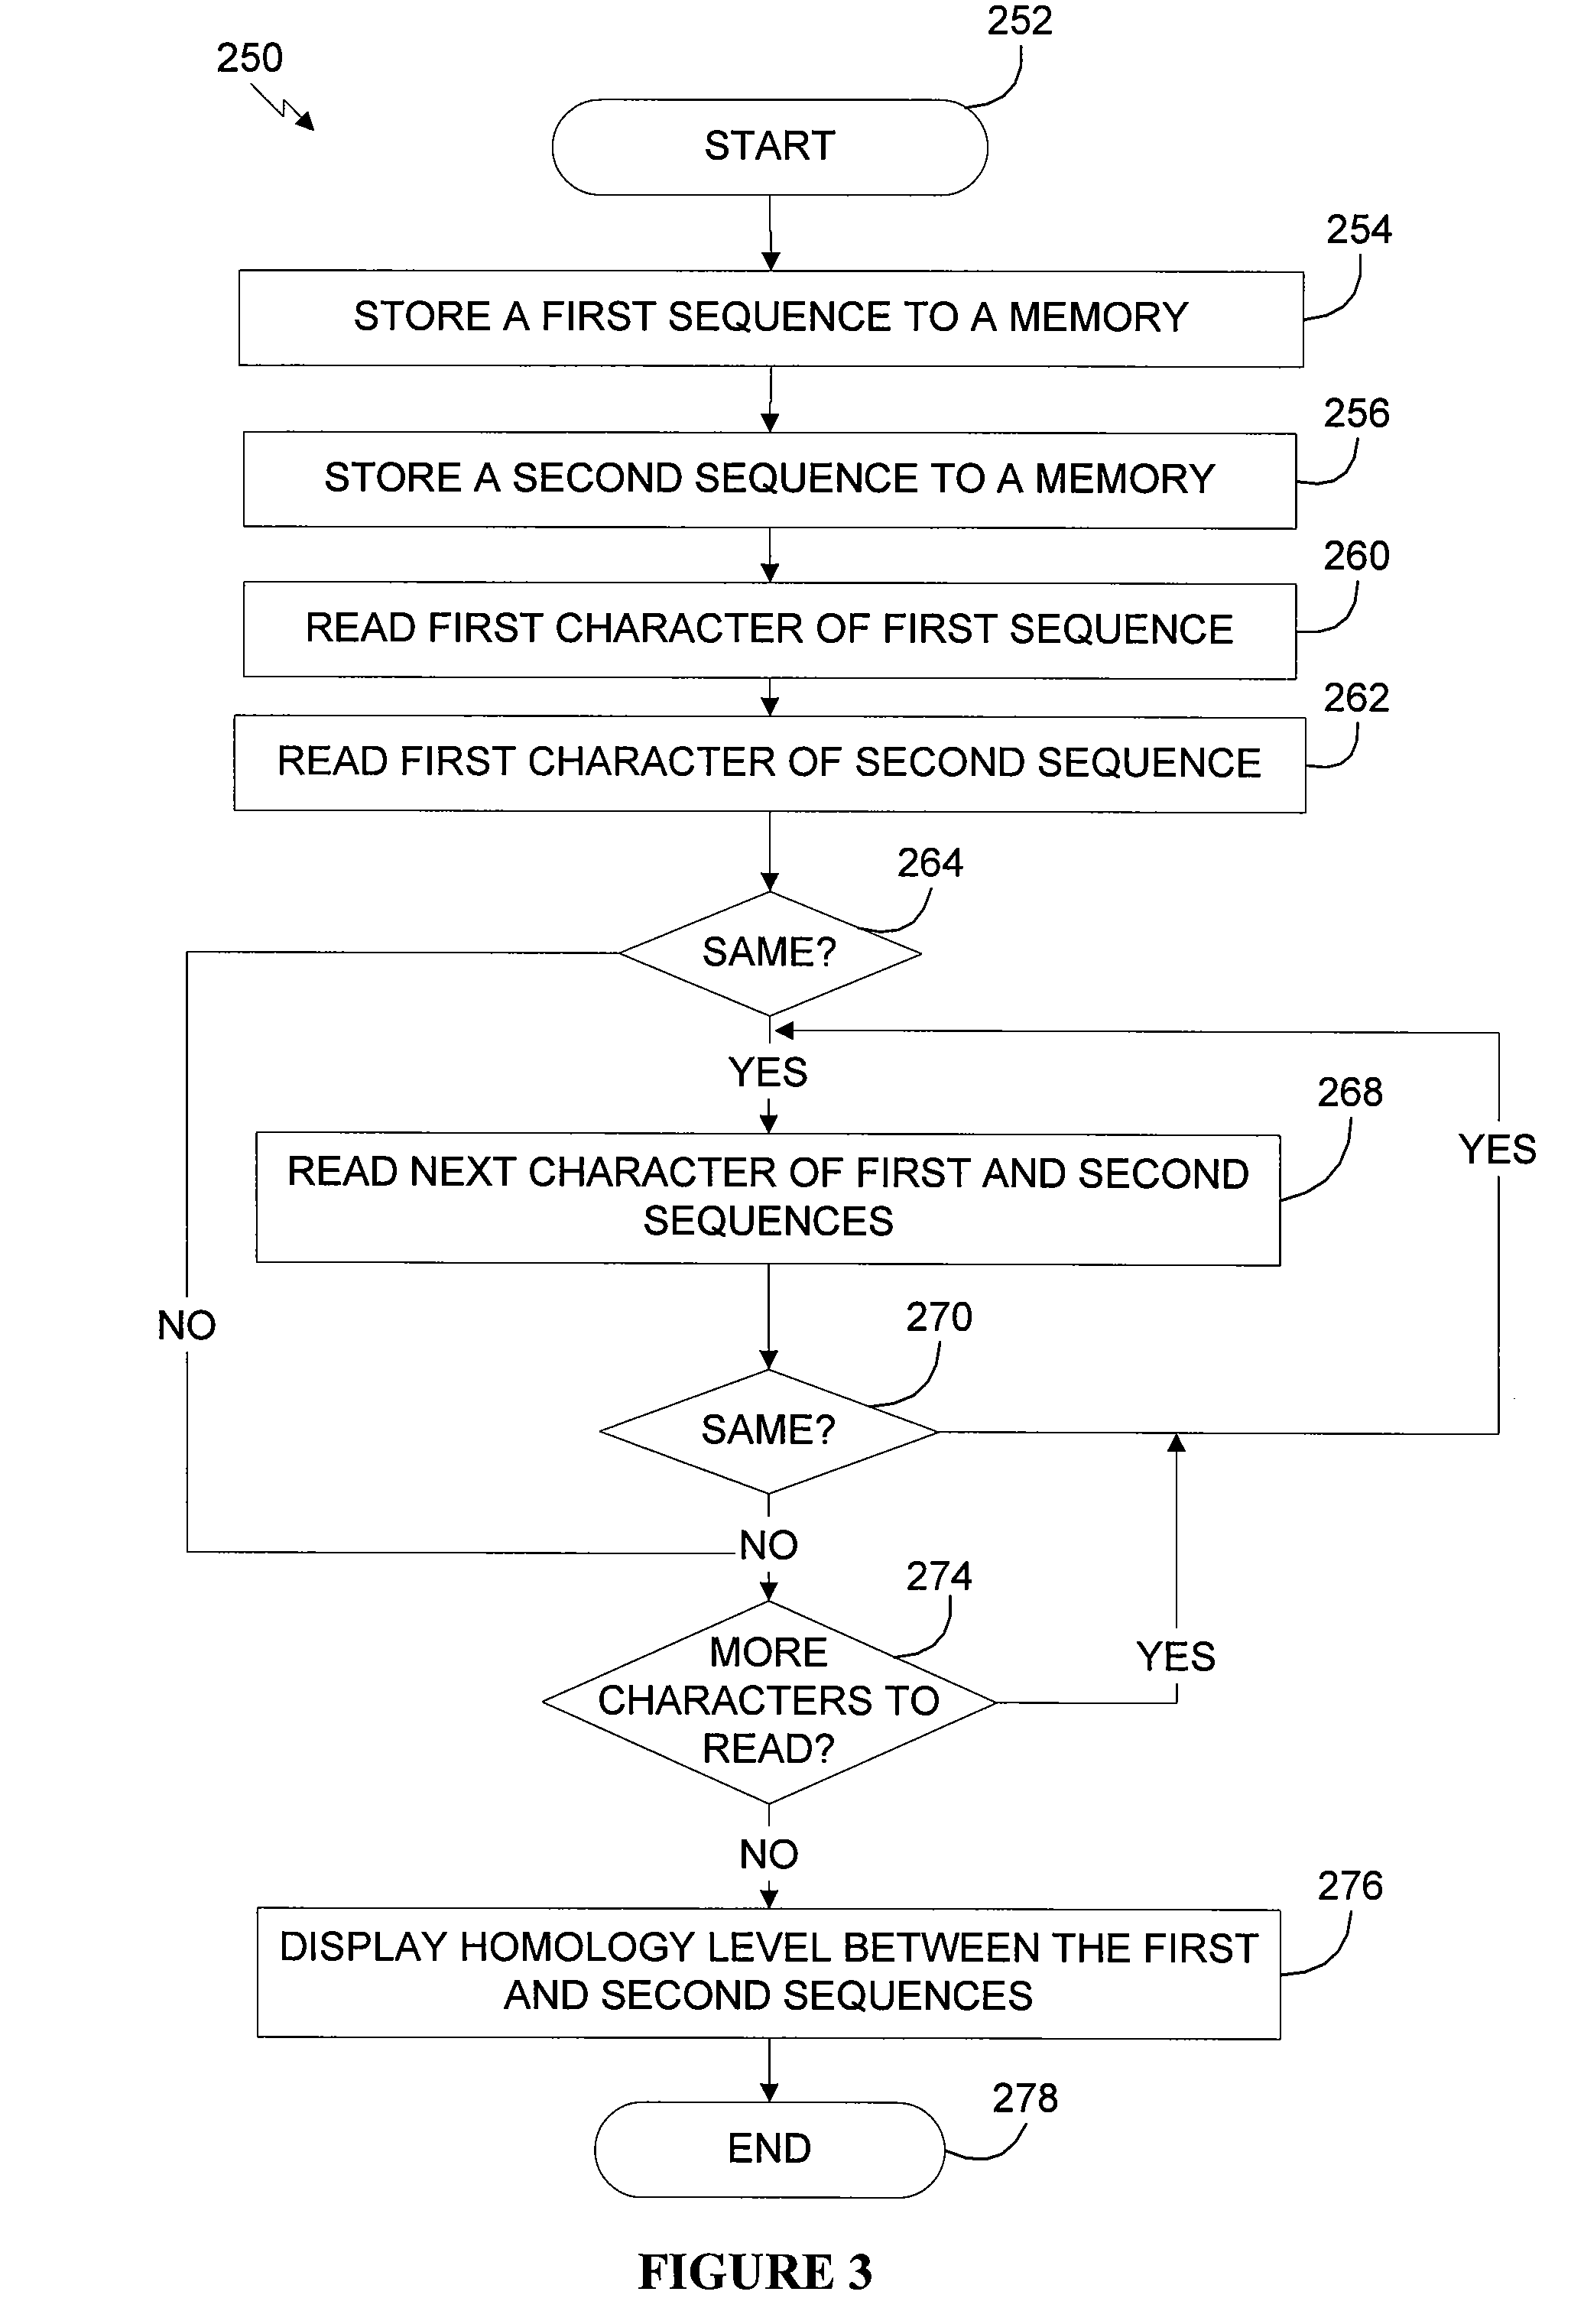 Phospholipases, nucleic acids encoding them and methods for making and using them